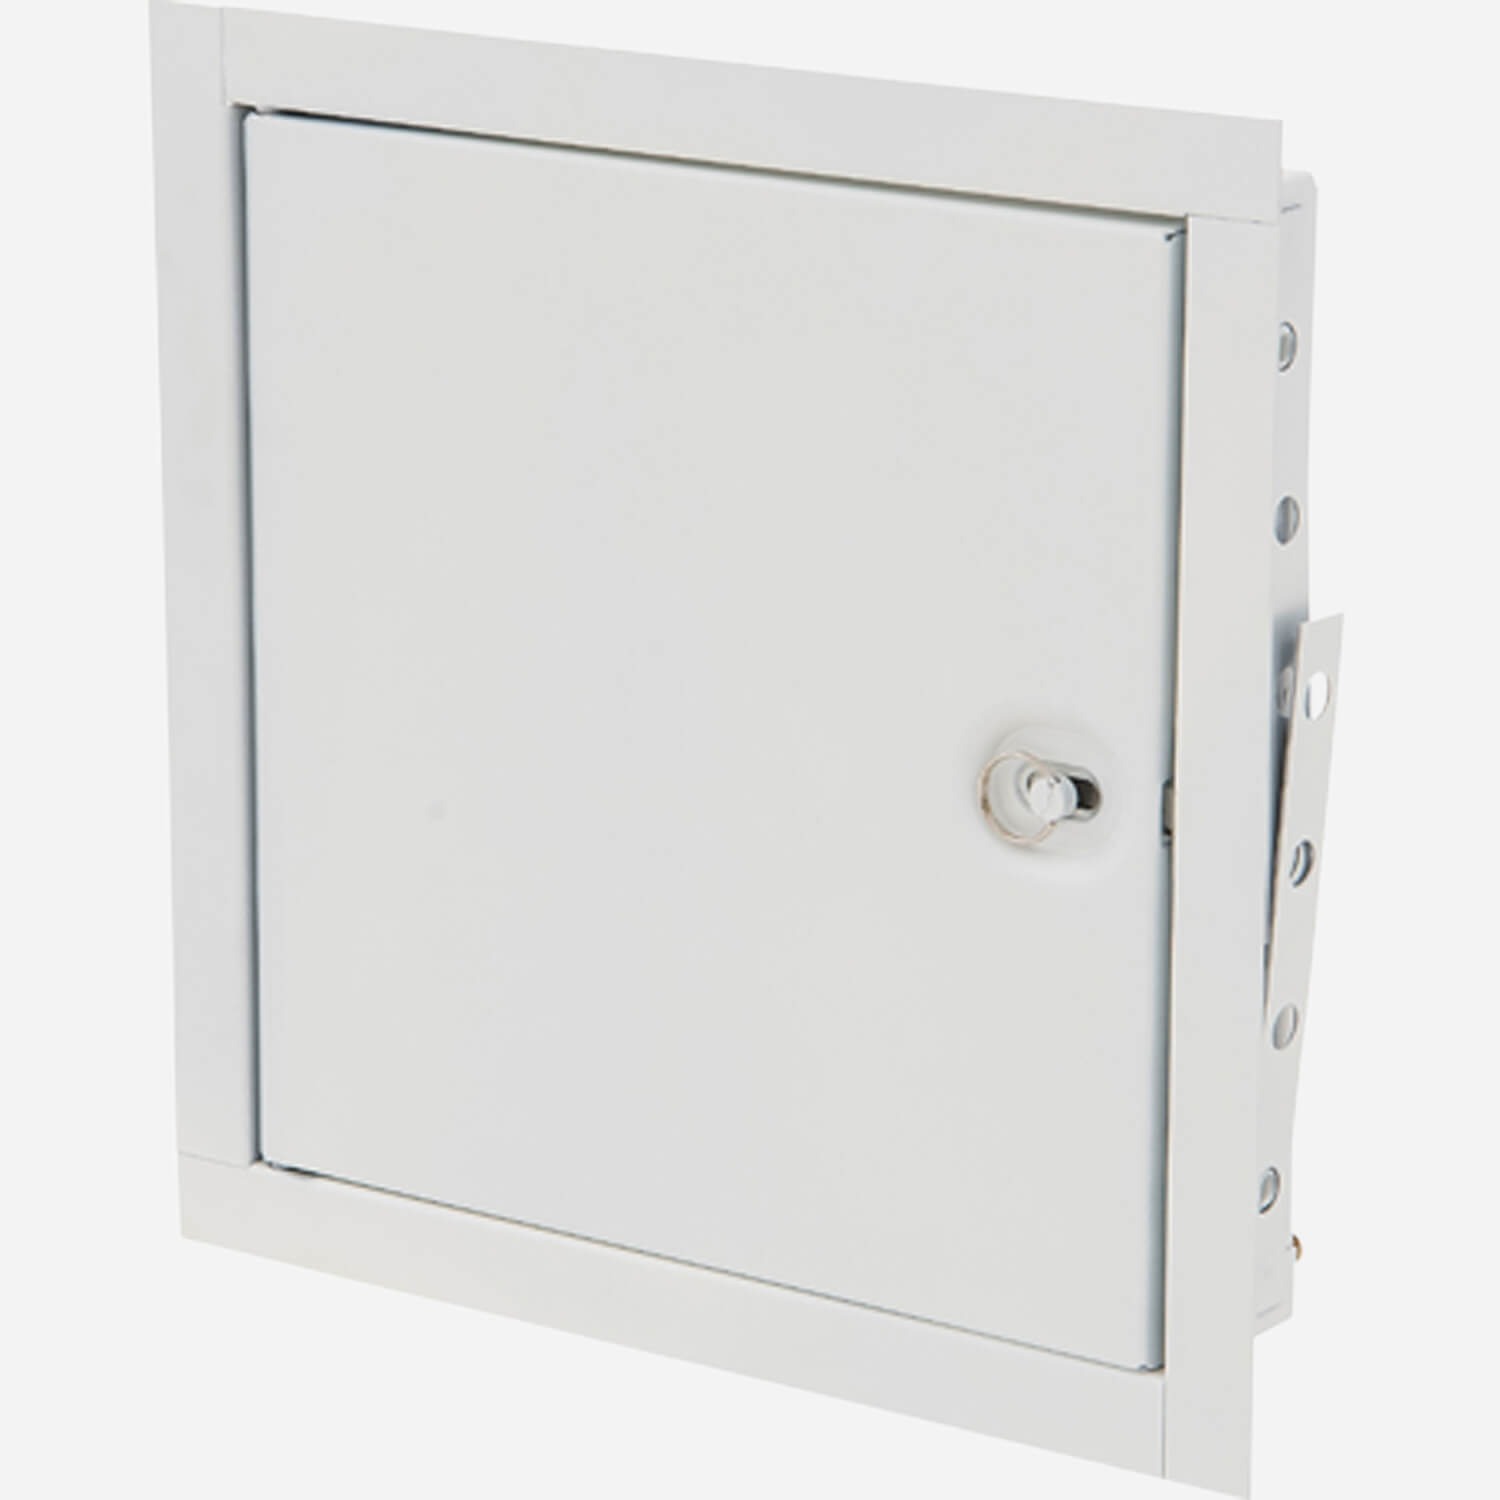 Access Door - E-FR 10x10 Non-Insulated Fire Rated for Walls